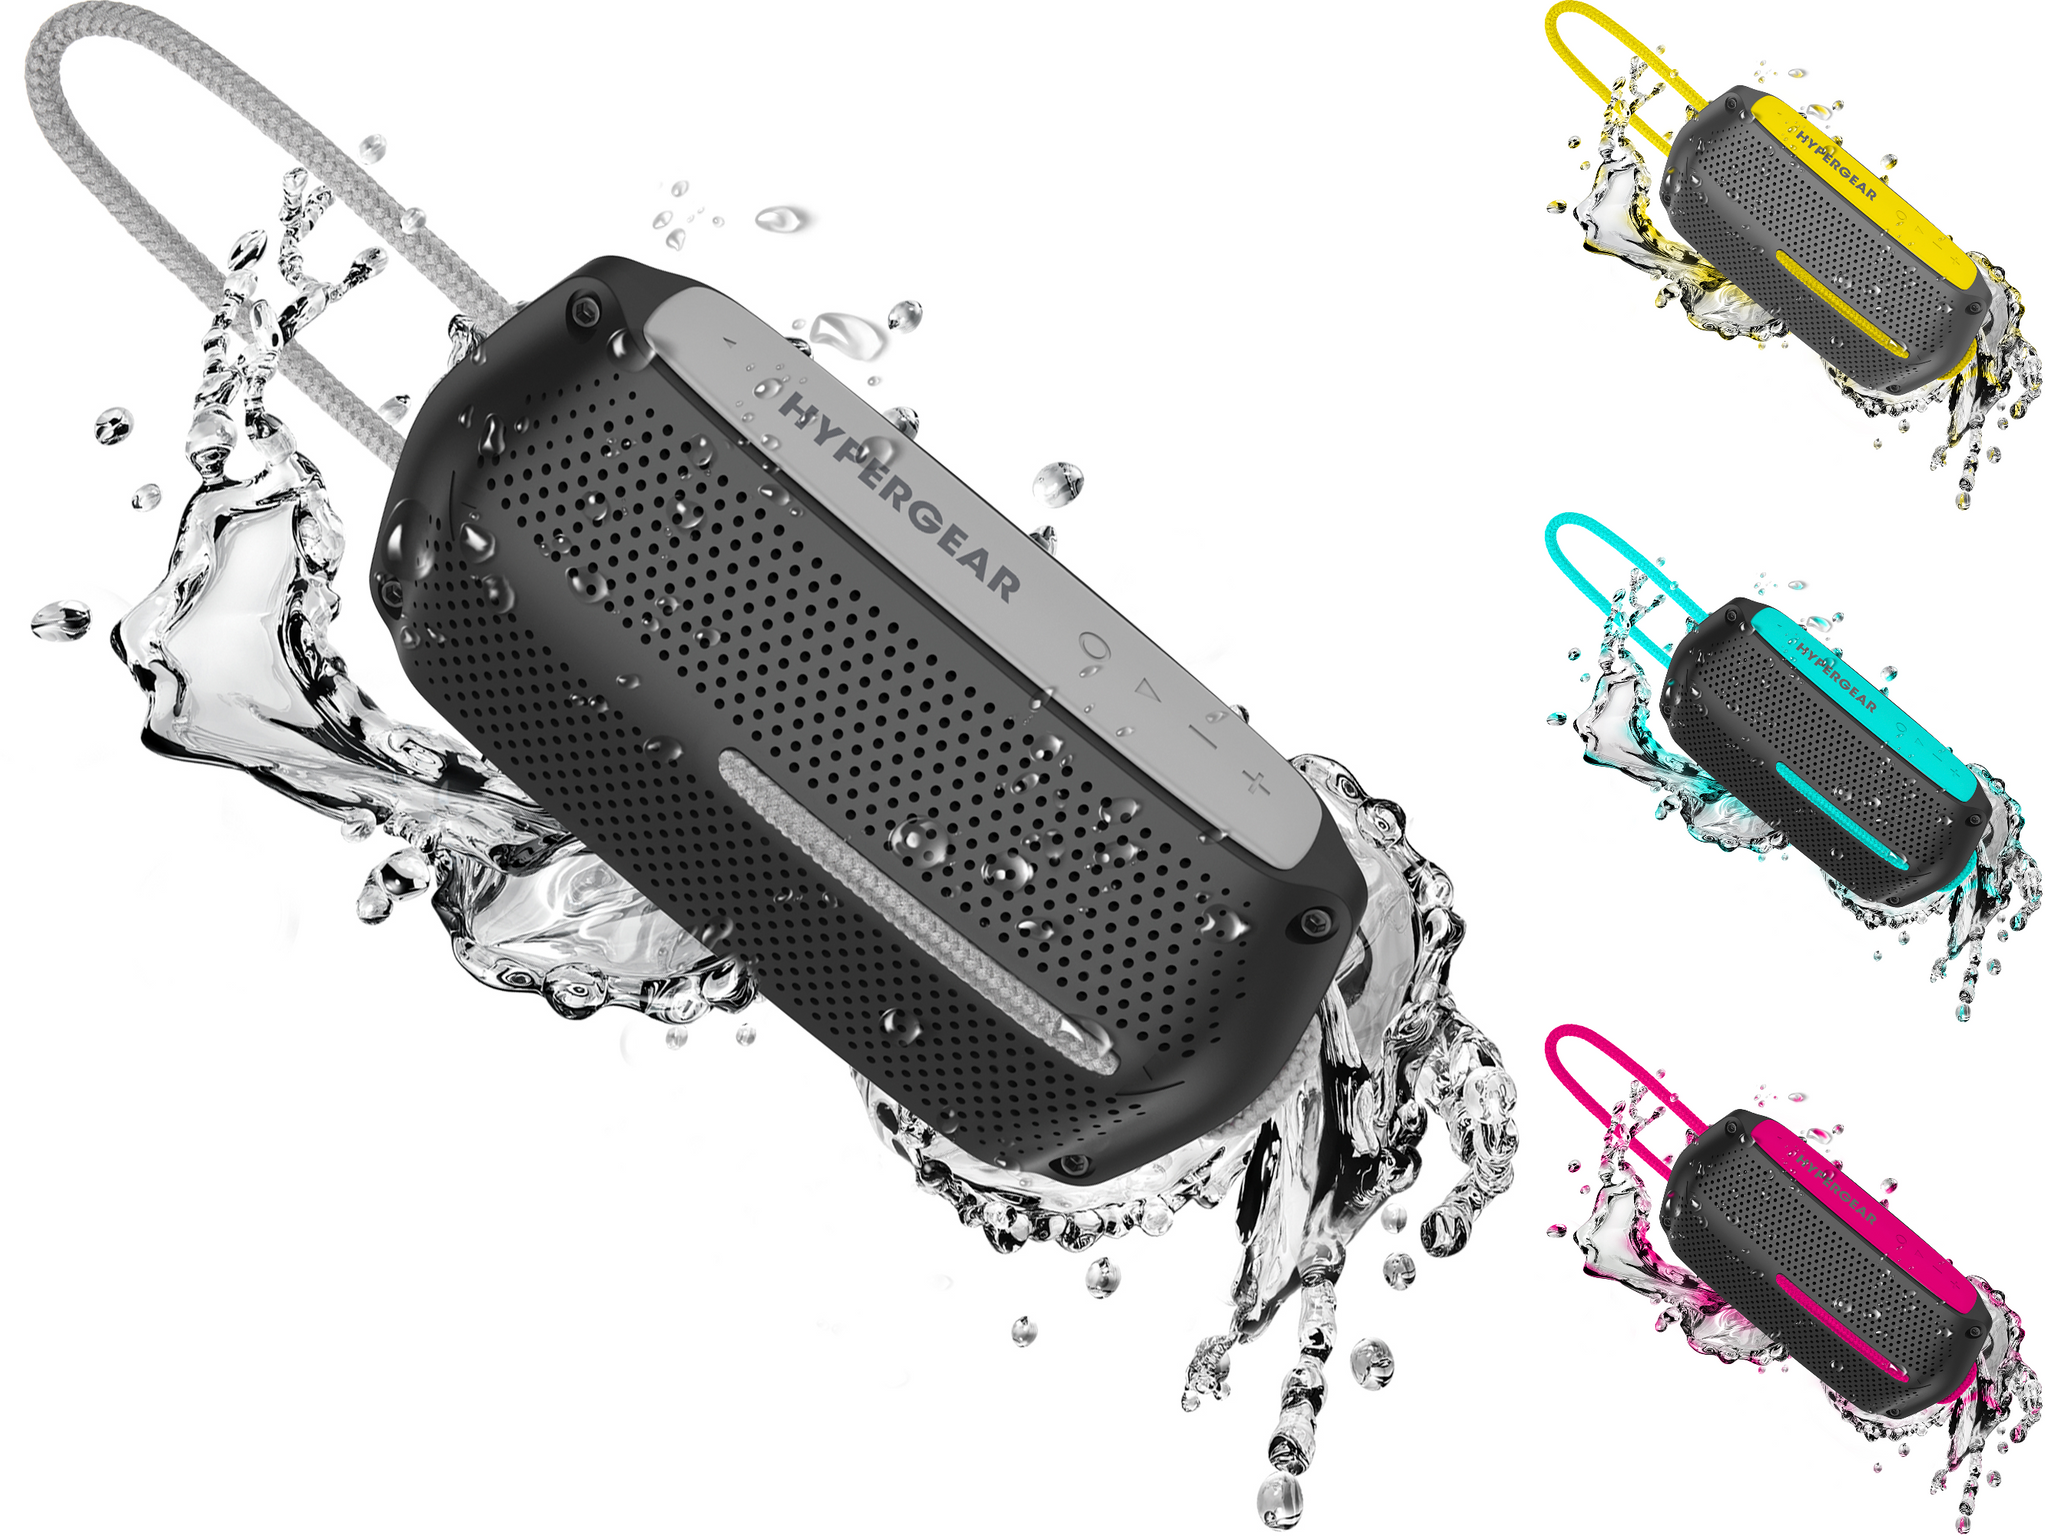 HyperGear Wave Water Resistant Wireless Speaker with Extended Battery